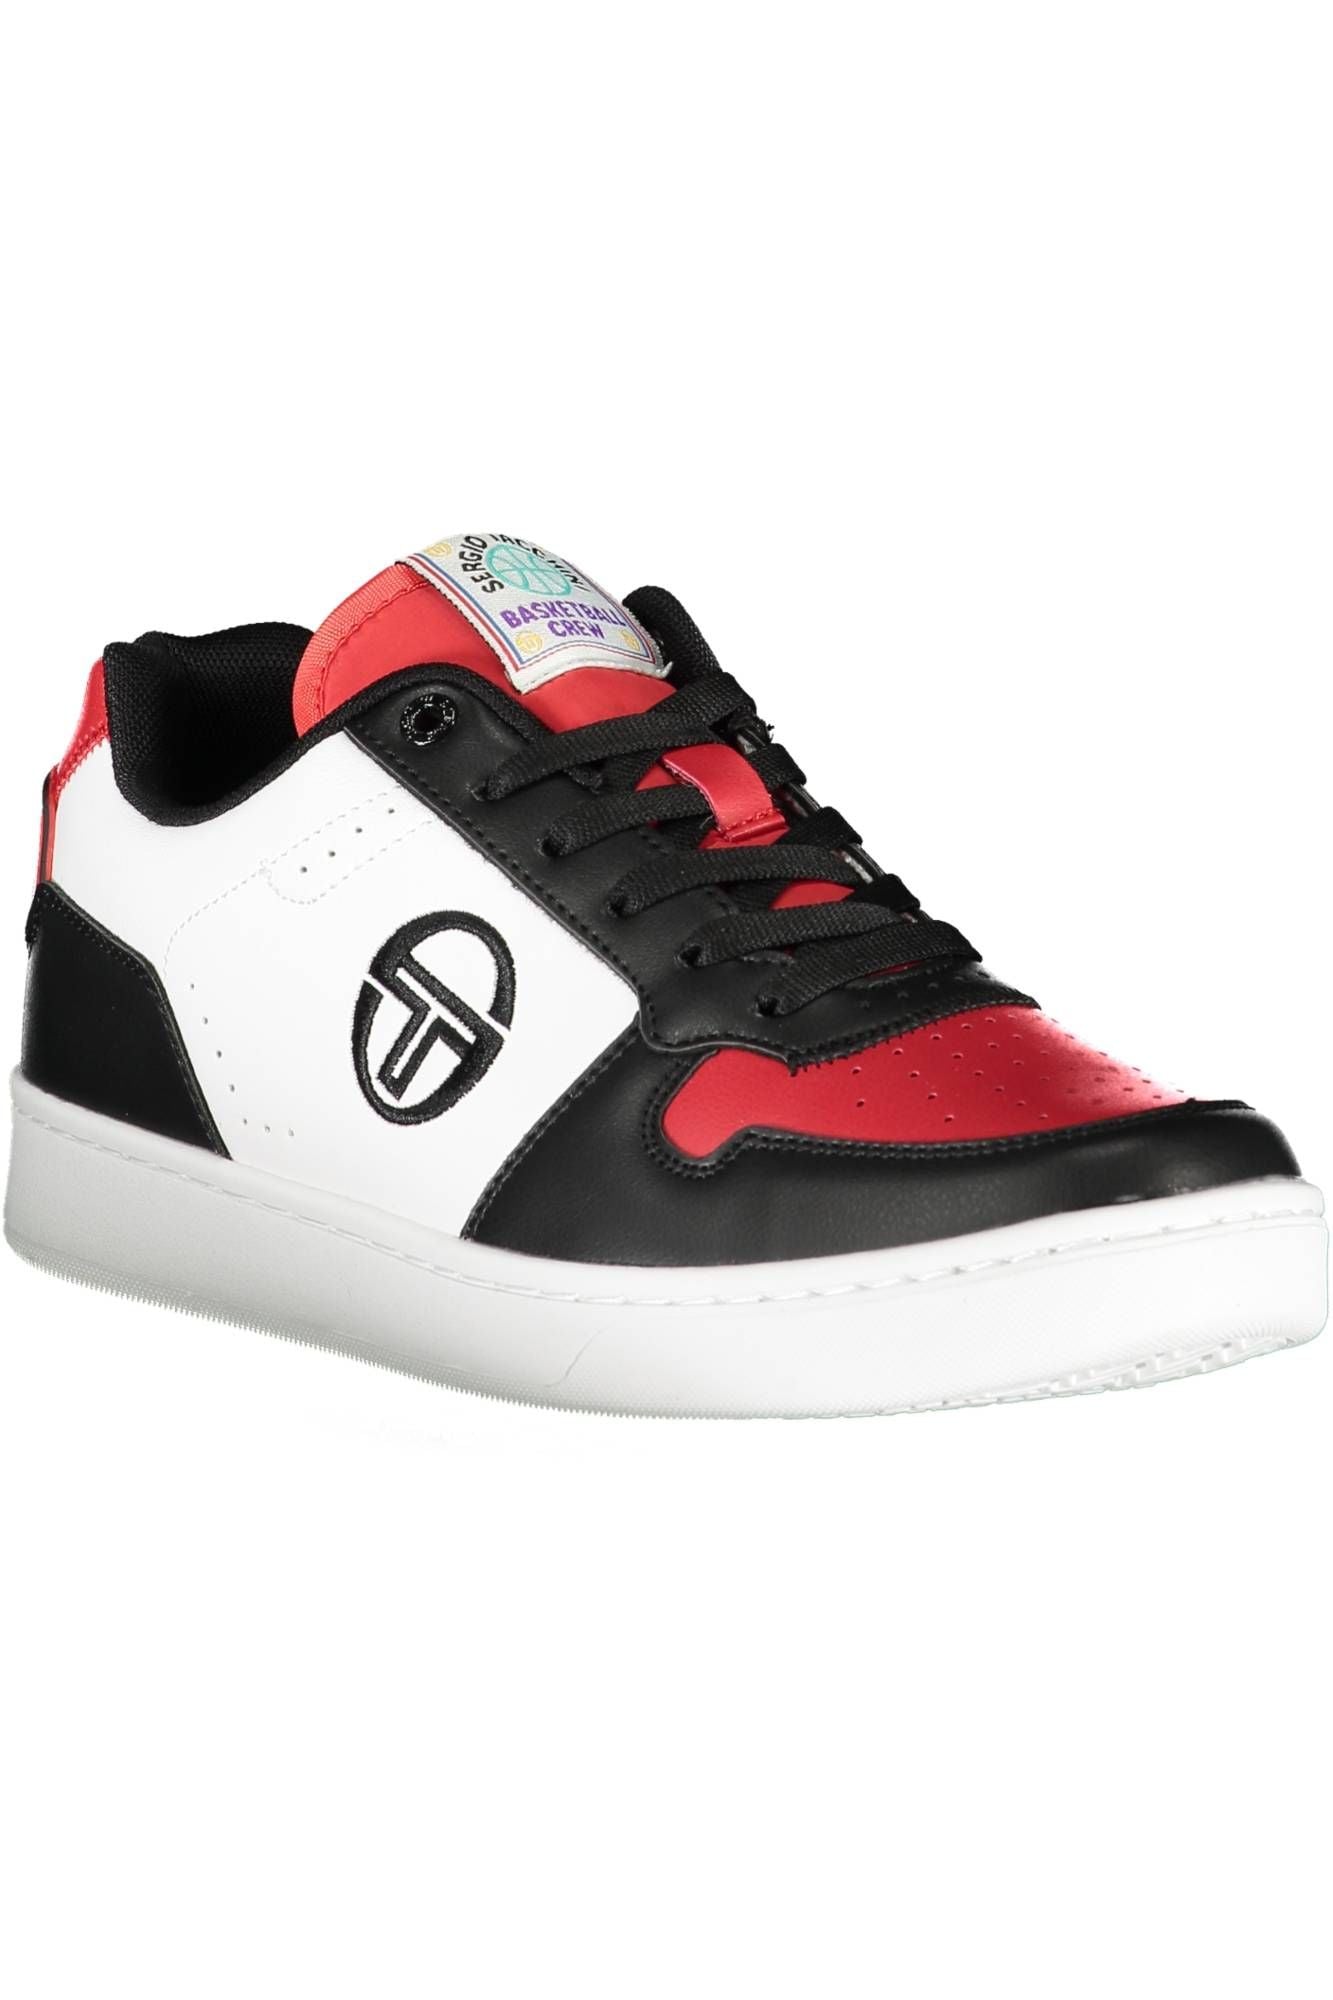 Sergio Tacchini Chic Contrasting Lace-Up Sports Sneakers